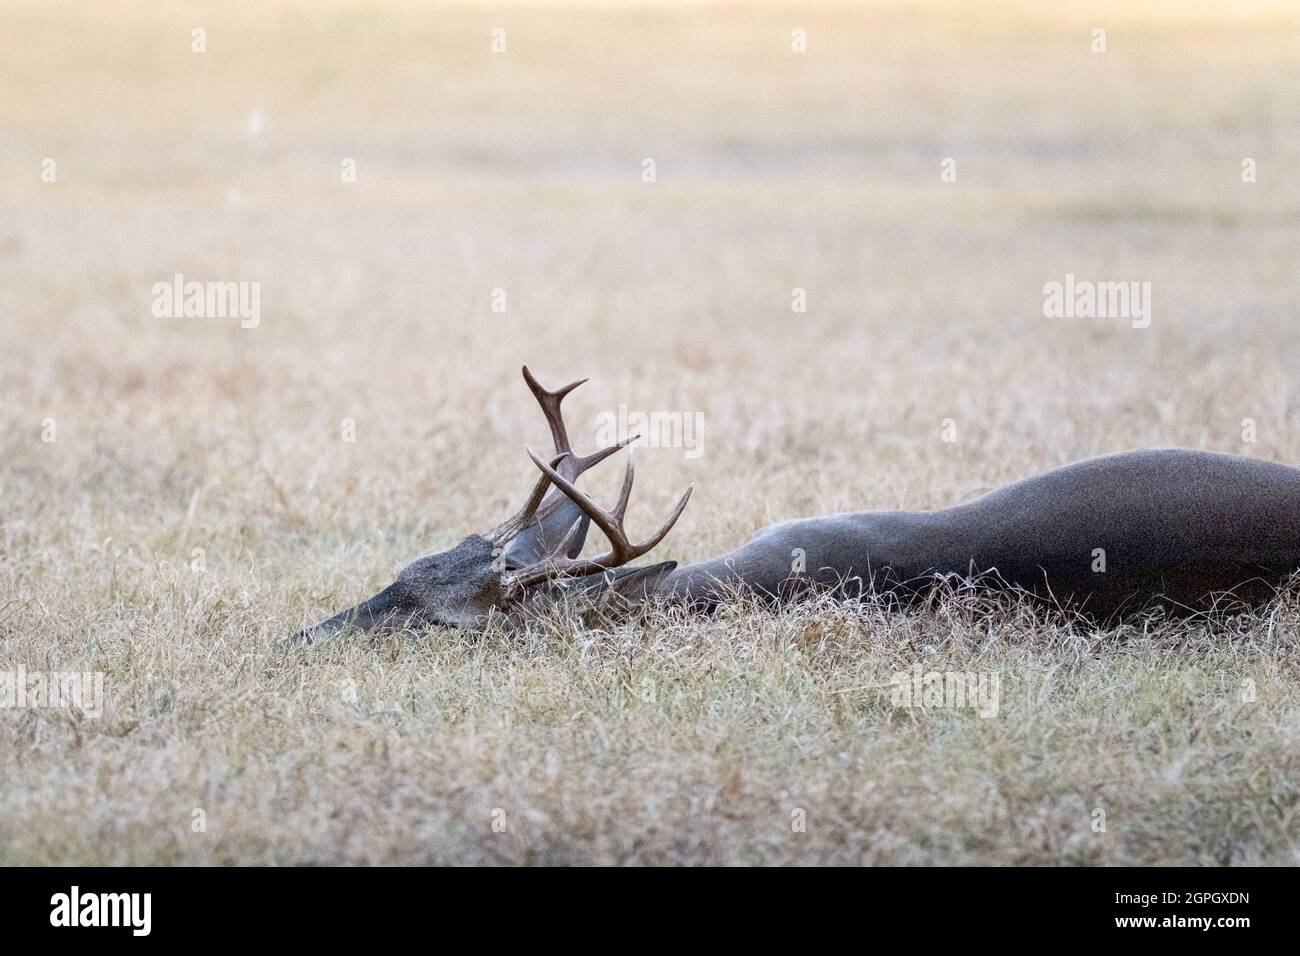 Male white-tailed buck deer Odocoileus virginianus with tall antlers laying down in suburban Texas backyard. Stock Photo